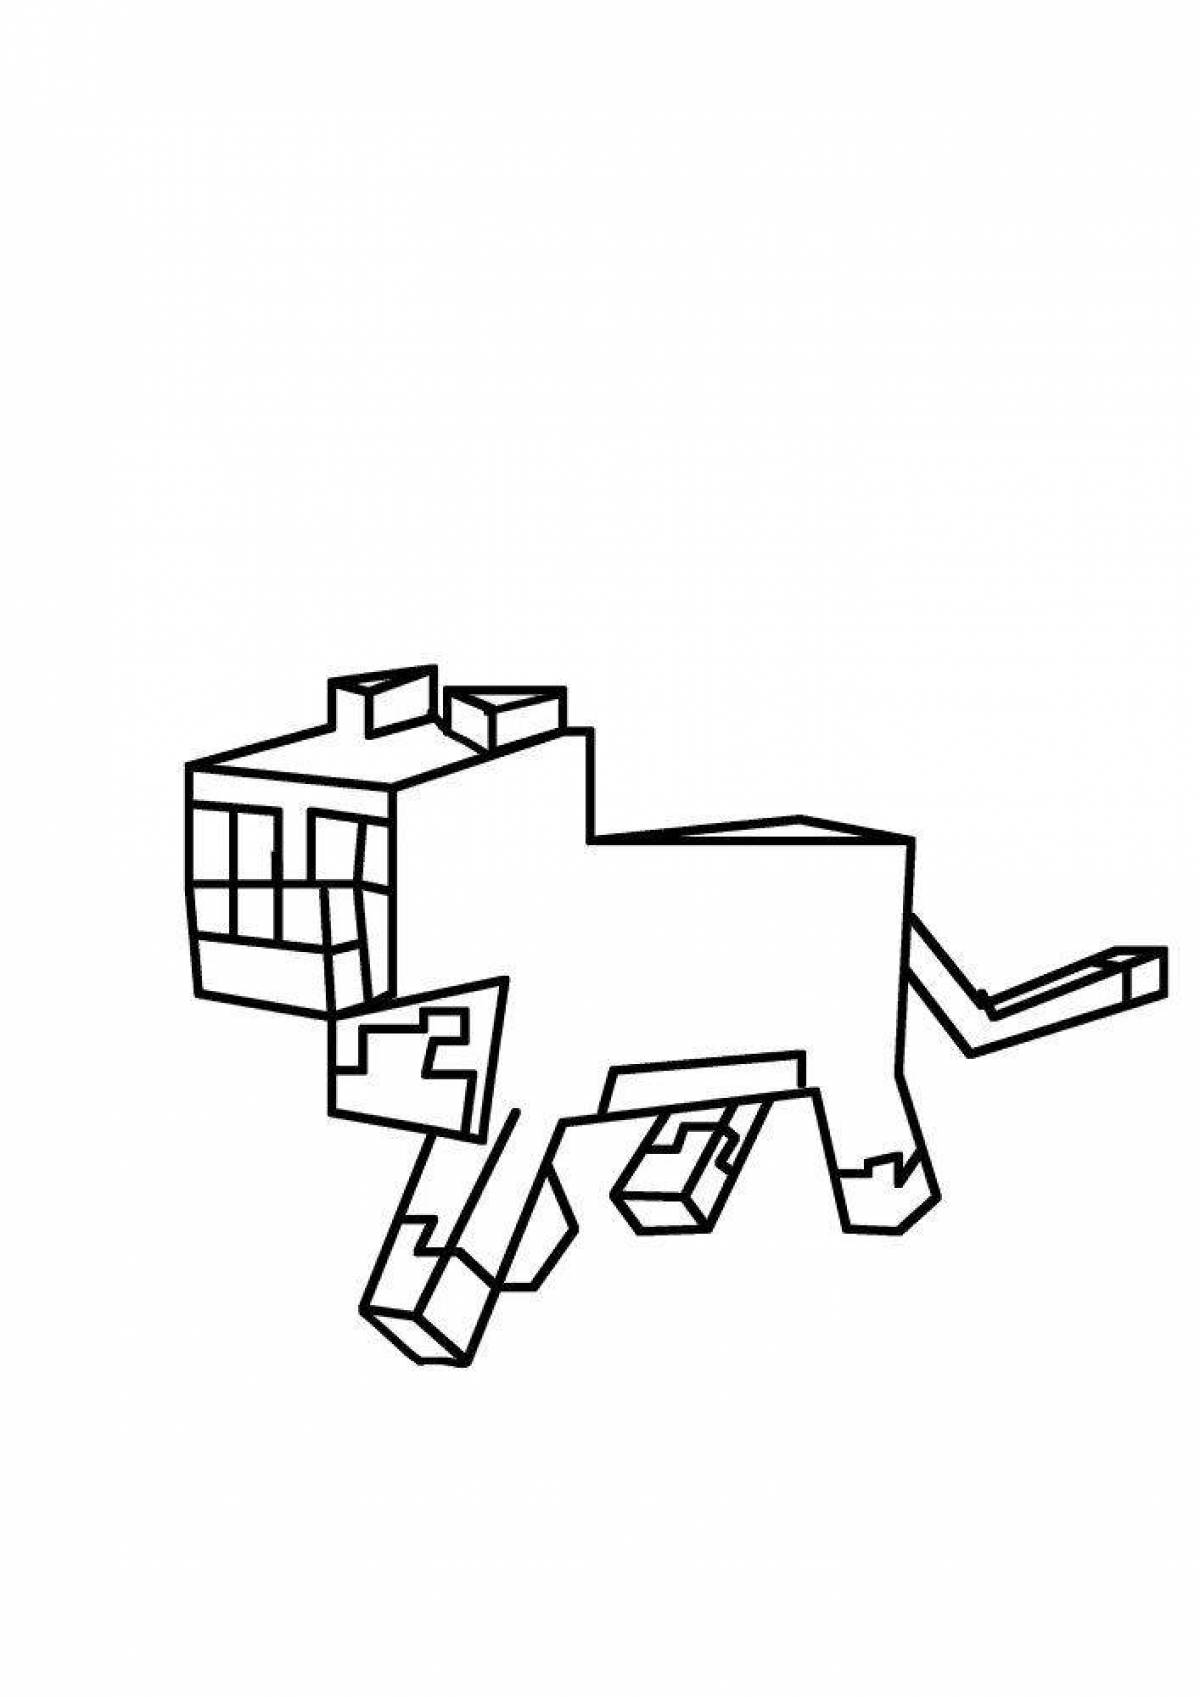 Magic minecraft cat coloring page